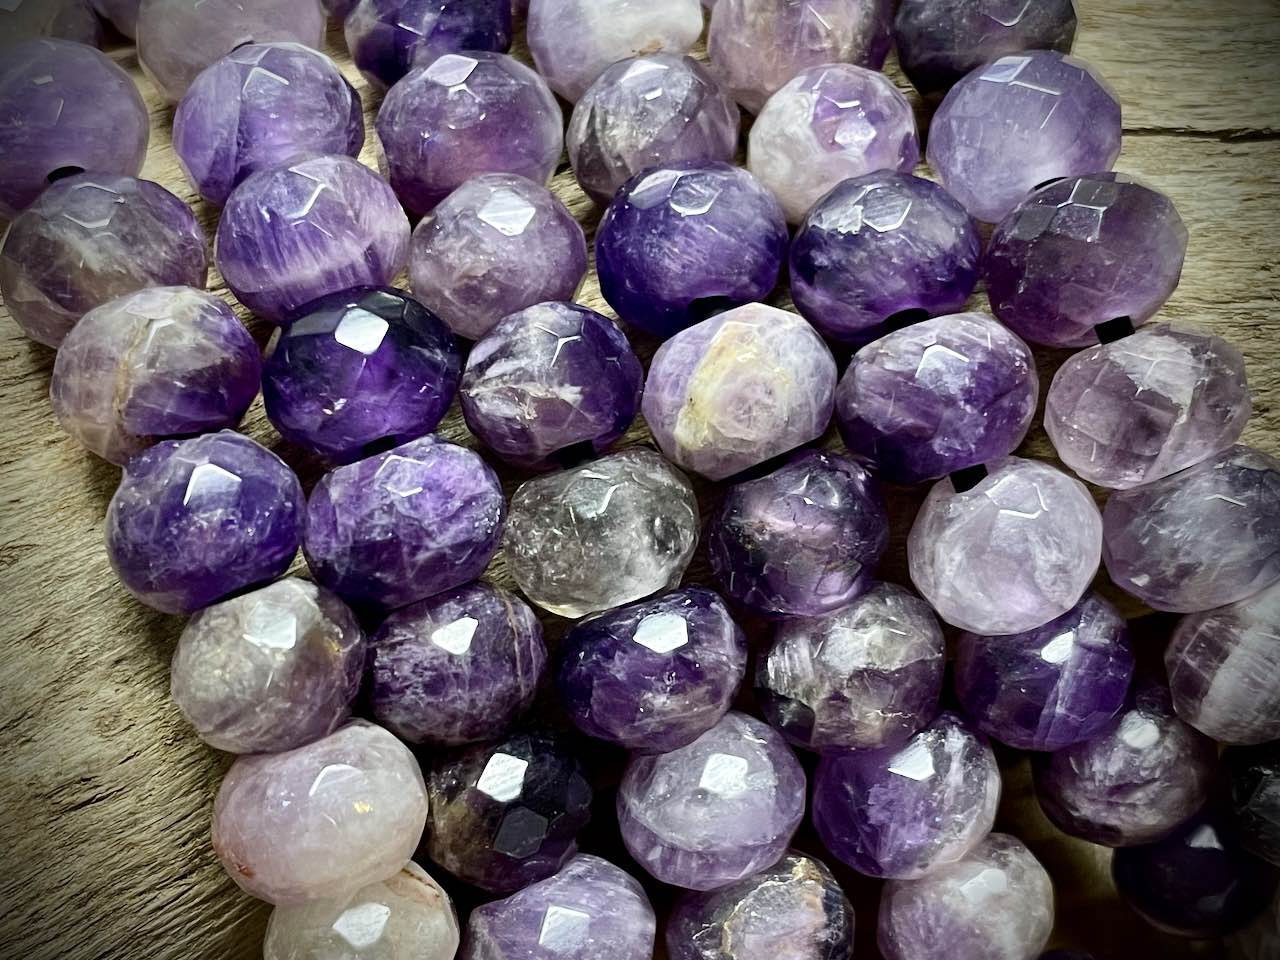 Amethyst Faceted Rondelle Beads - 11-12mm x 8mm - Large Hole (2.5mm Hole) - 8”